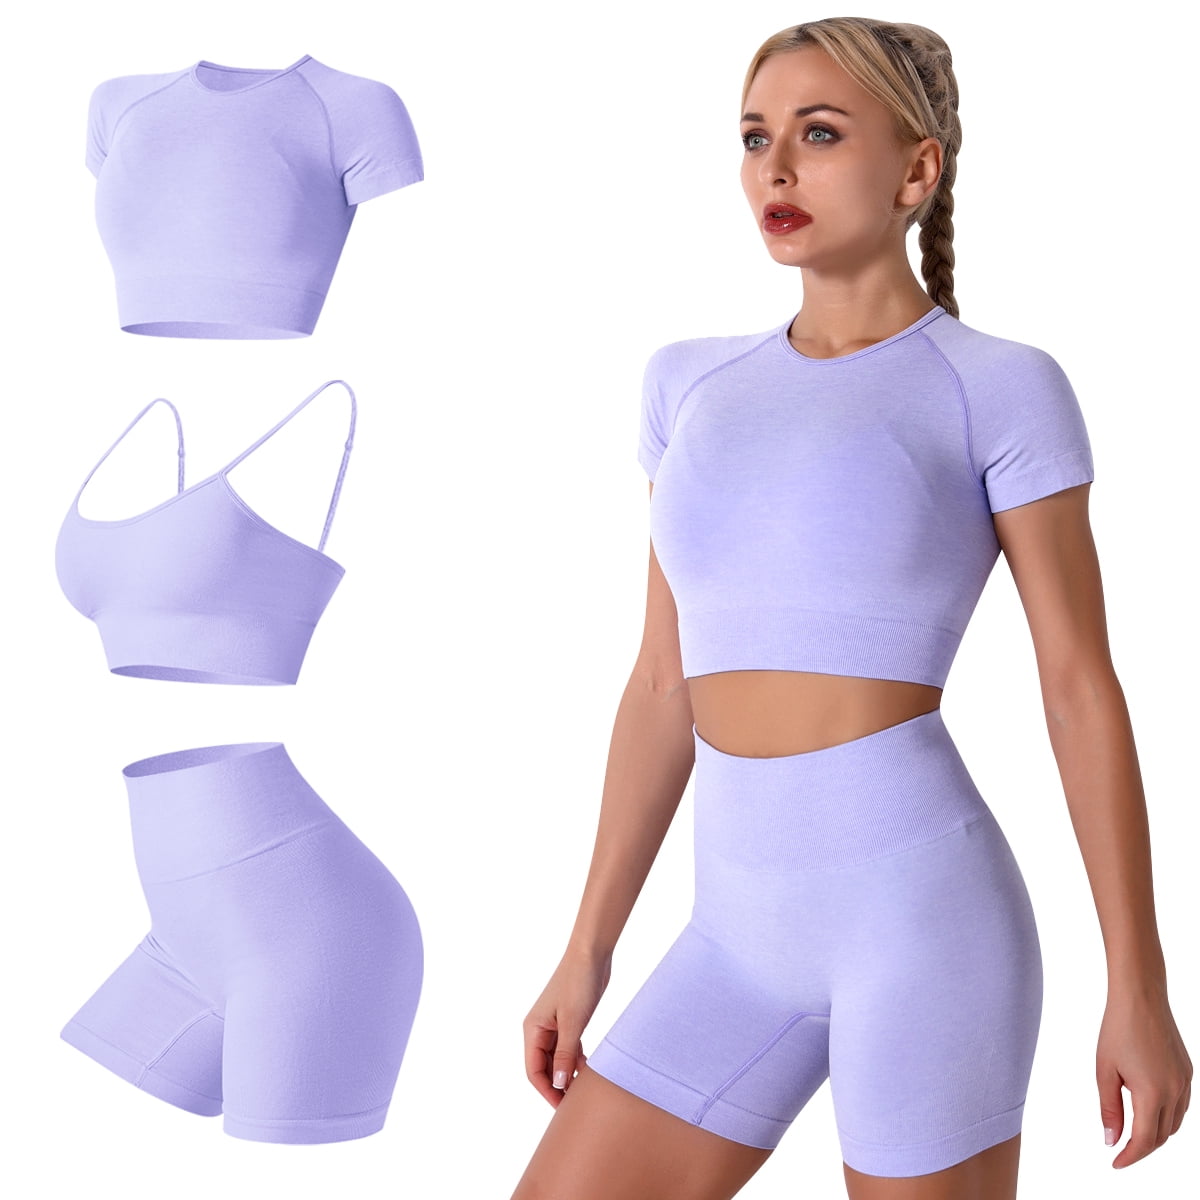 Women's Yoga Outfit Seamless Workout Set High Waist Exercise Short Pants  with Sport Bra Tracksuit Gym Tracksuits, 3-Piece 